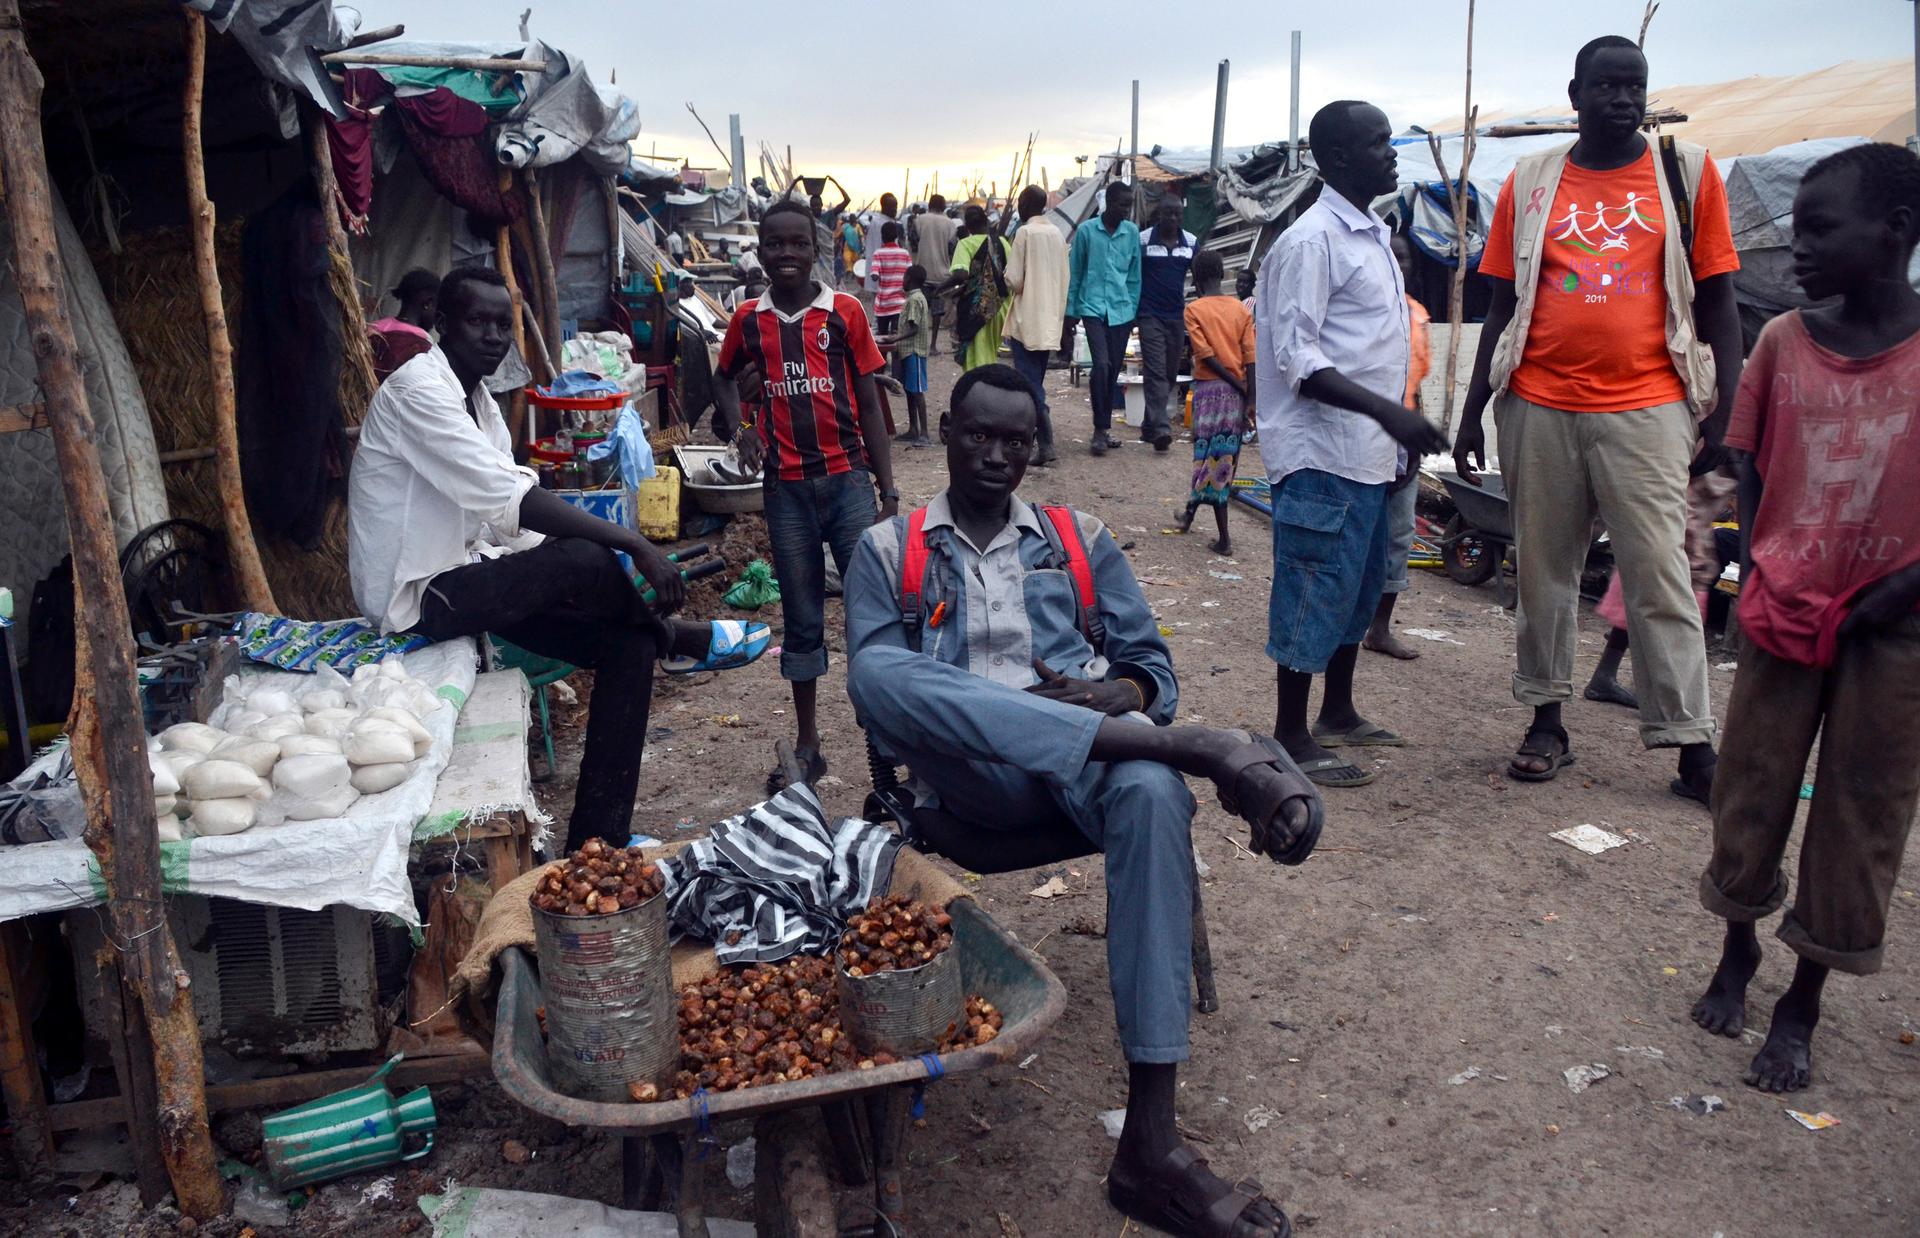 Residents displaced by recent fighting gather at a trading area within the United Nations Mission in South Sudan in Malakal, in Upper Nile State.